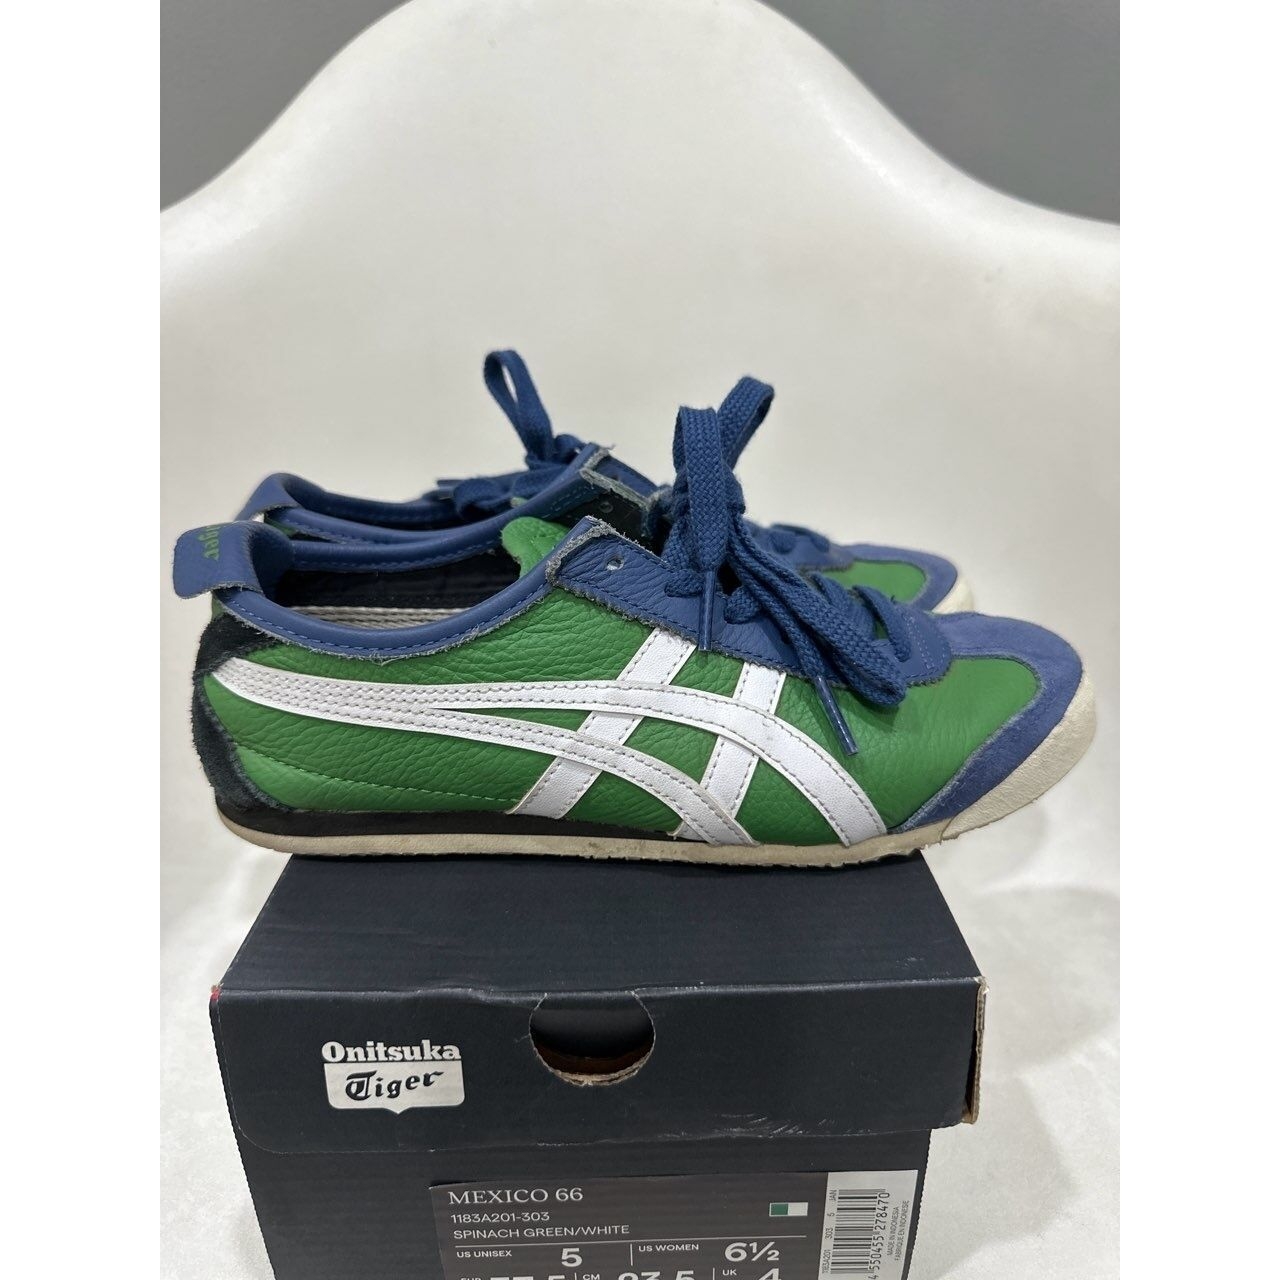 Onitsuka Tiger Multicolour Sneakers